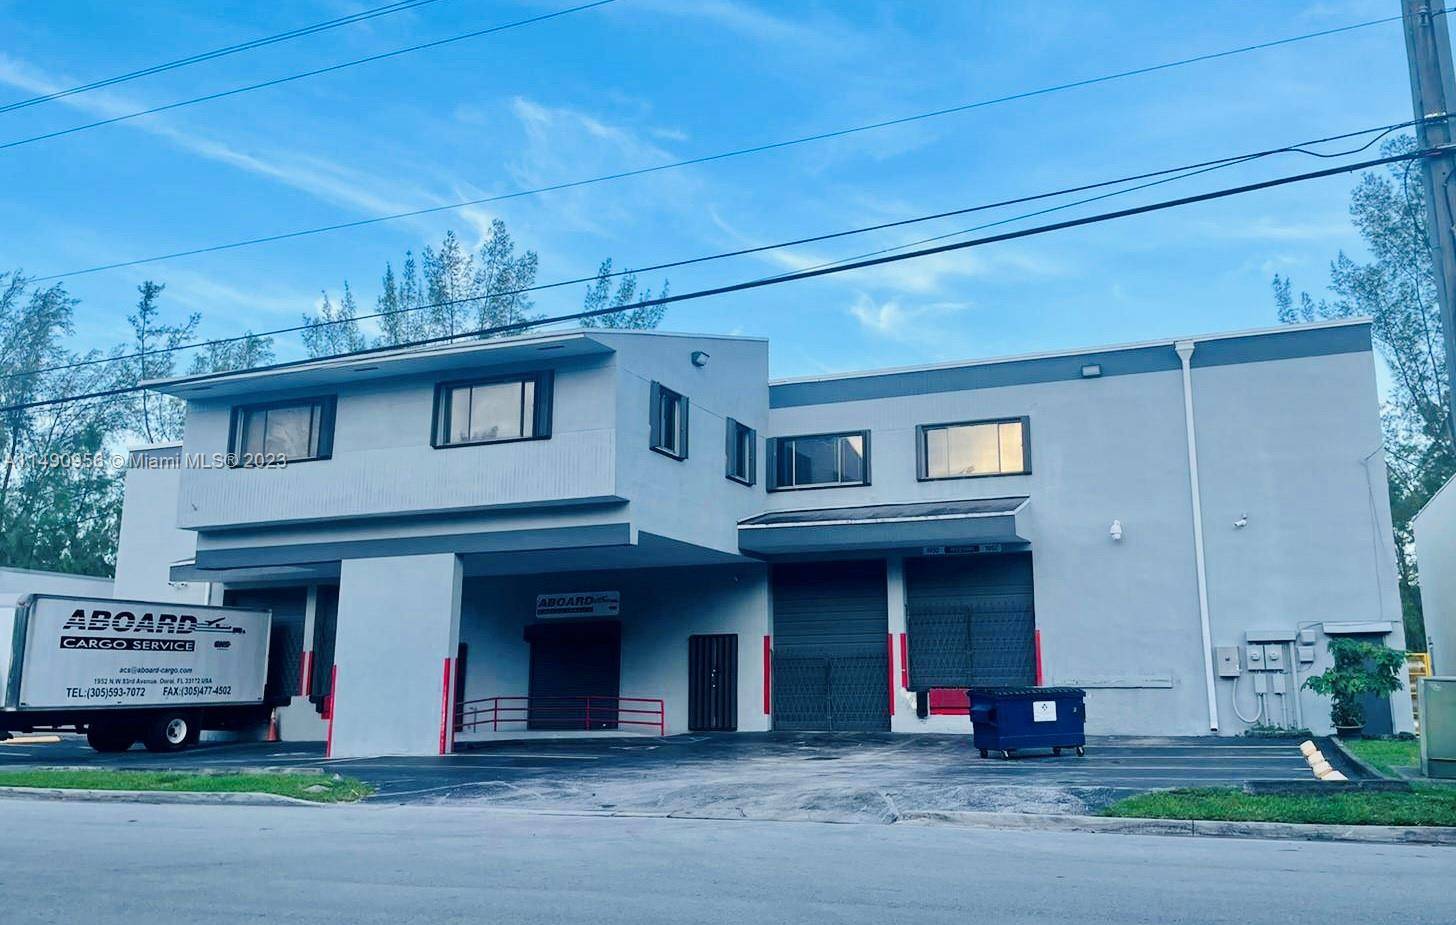 Great opportunity to be the owner of a warehouse office free standing building in the heart of Doral.